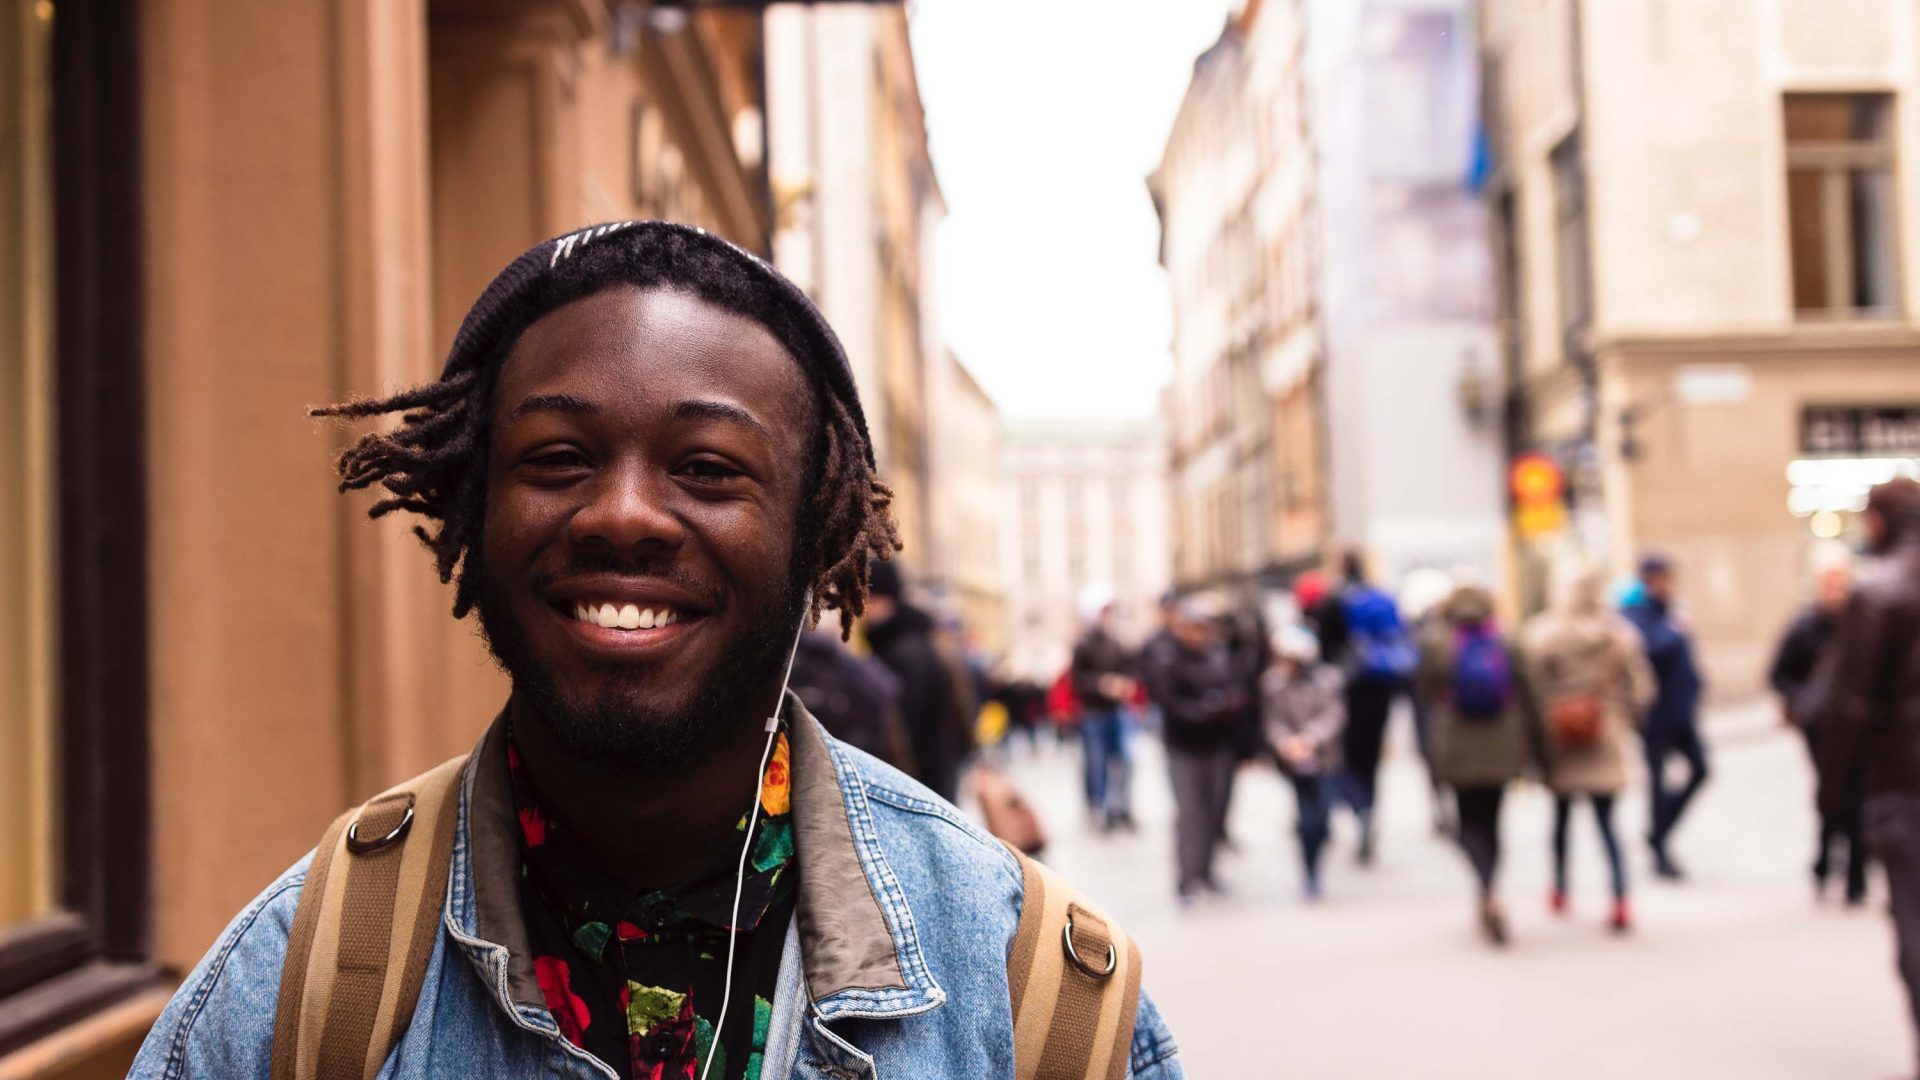 Five common experiences Black travelers face (and how I navigate them)